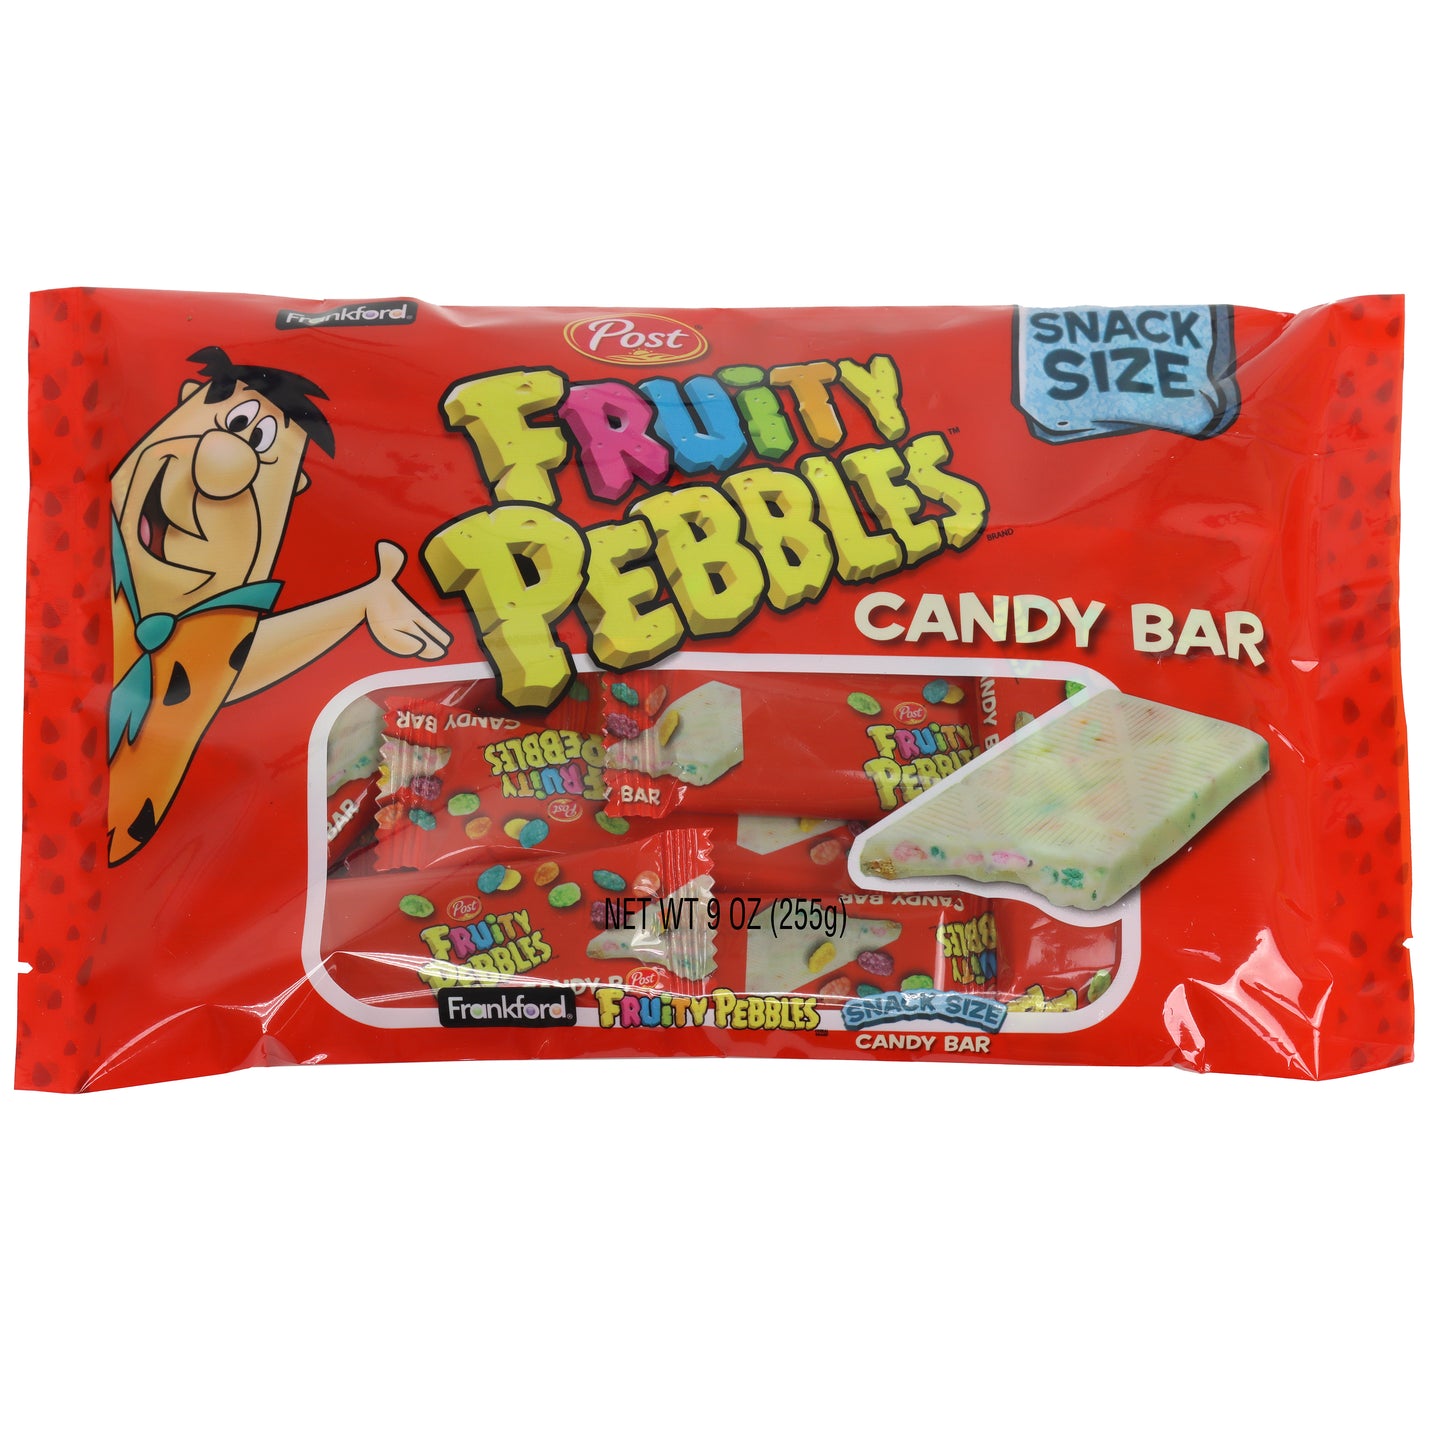 Cocoa PEBBLES™ King Size Candy Bar – Frankford Candy